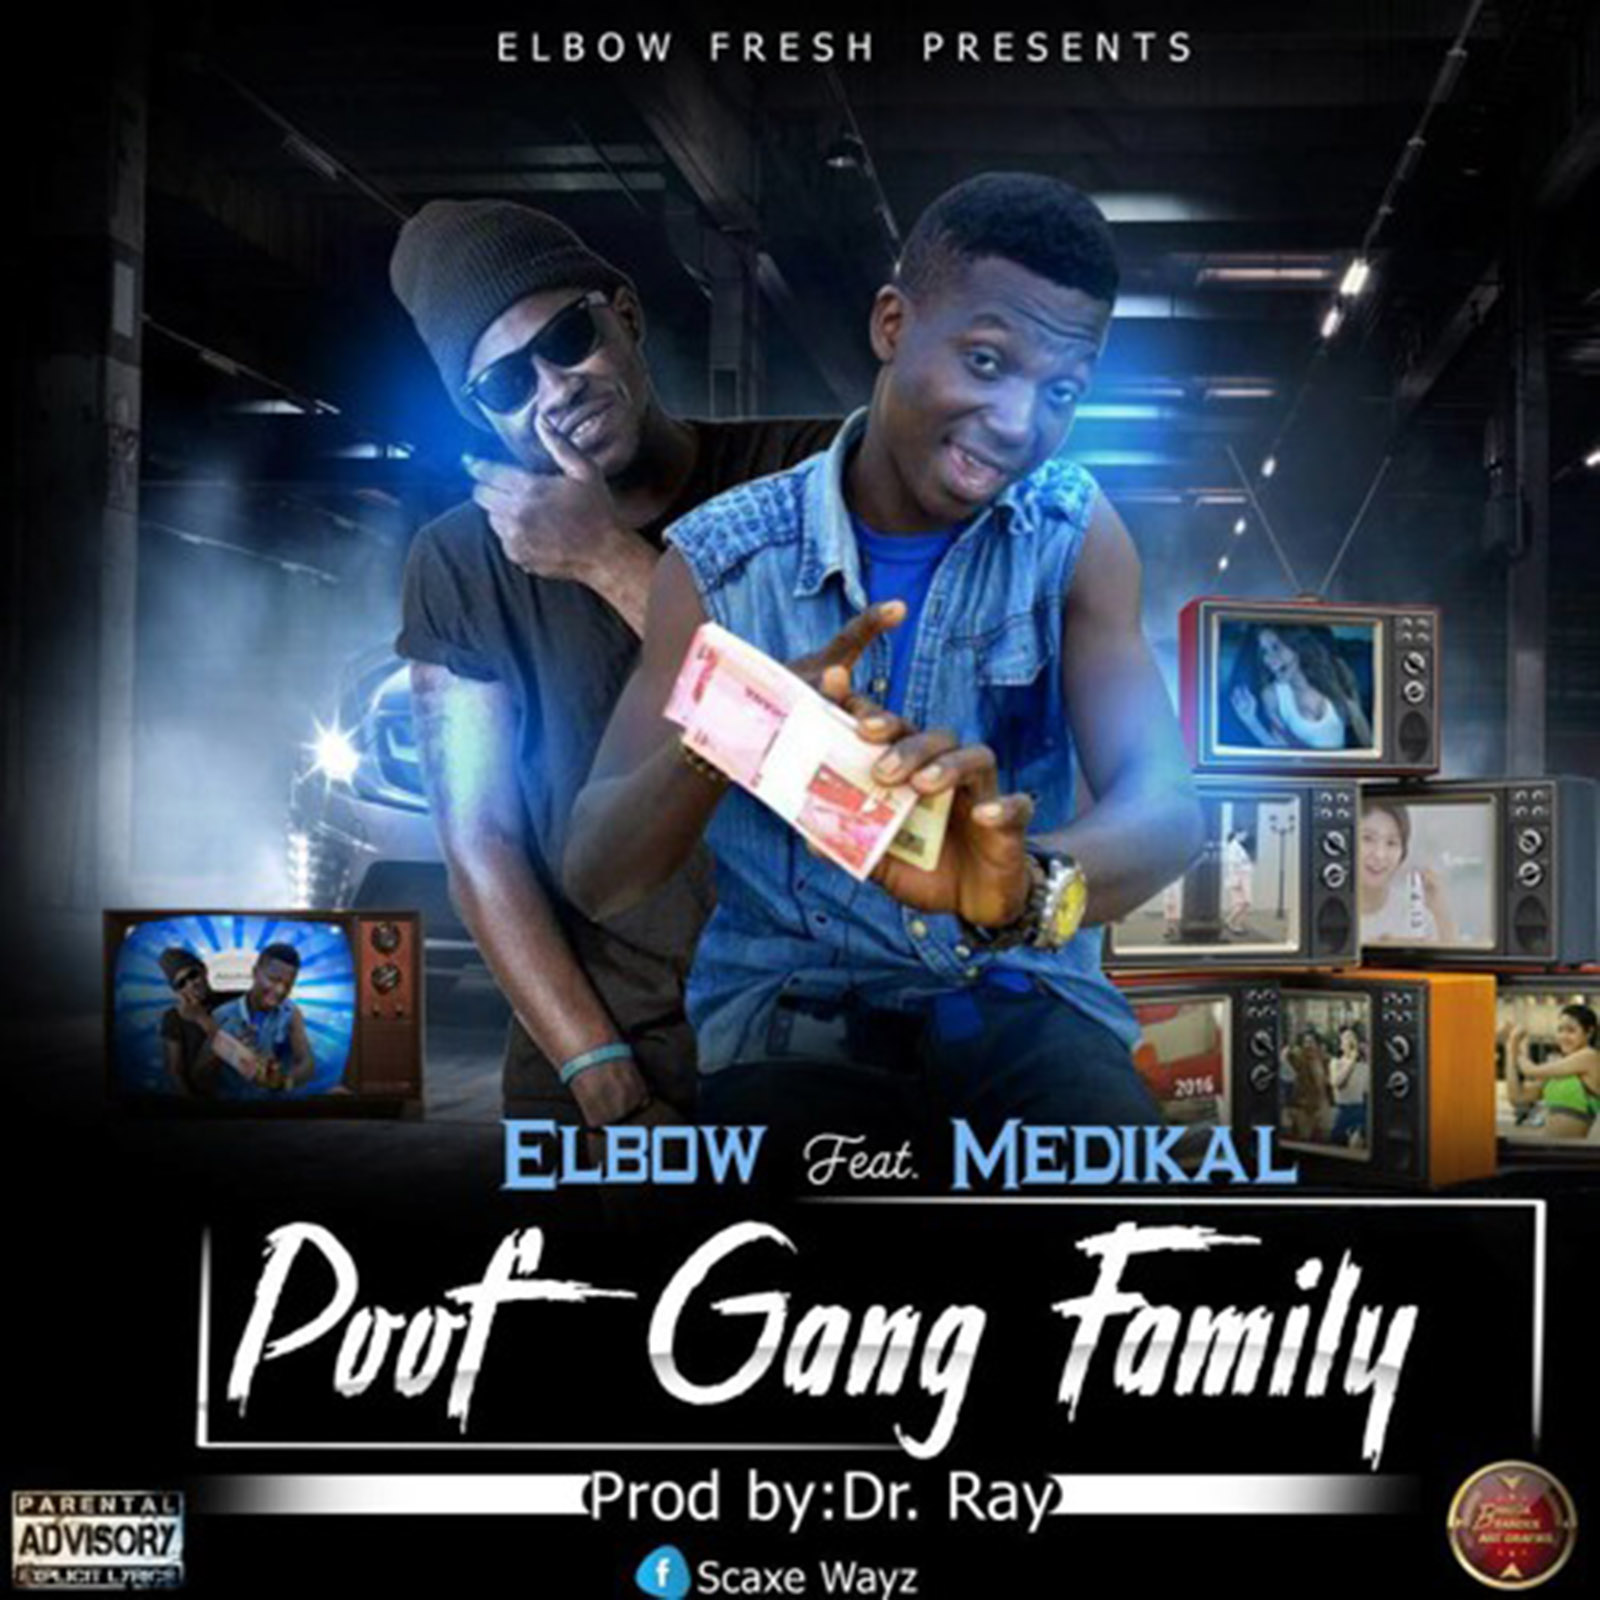 Poof Gang Family by Elbow feat. Medikal